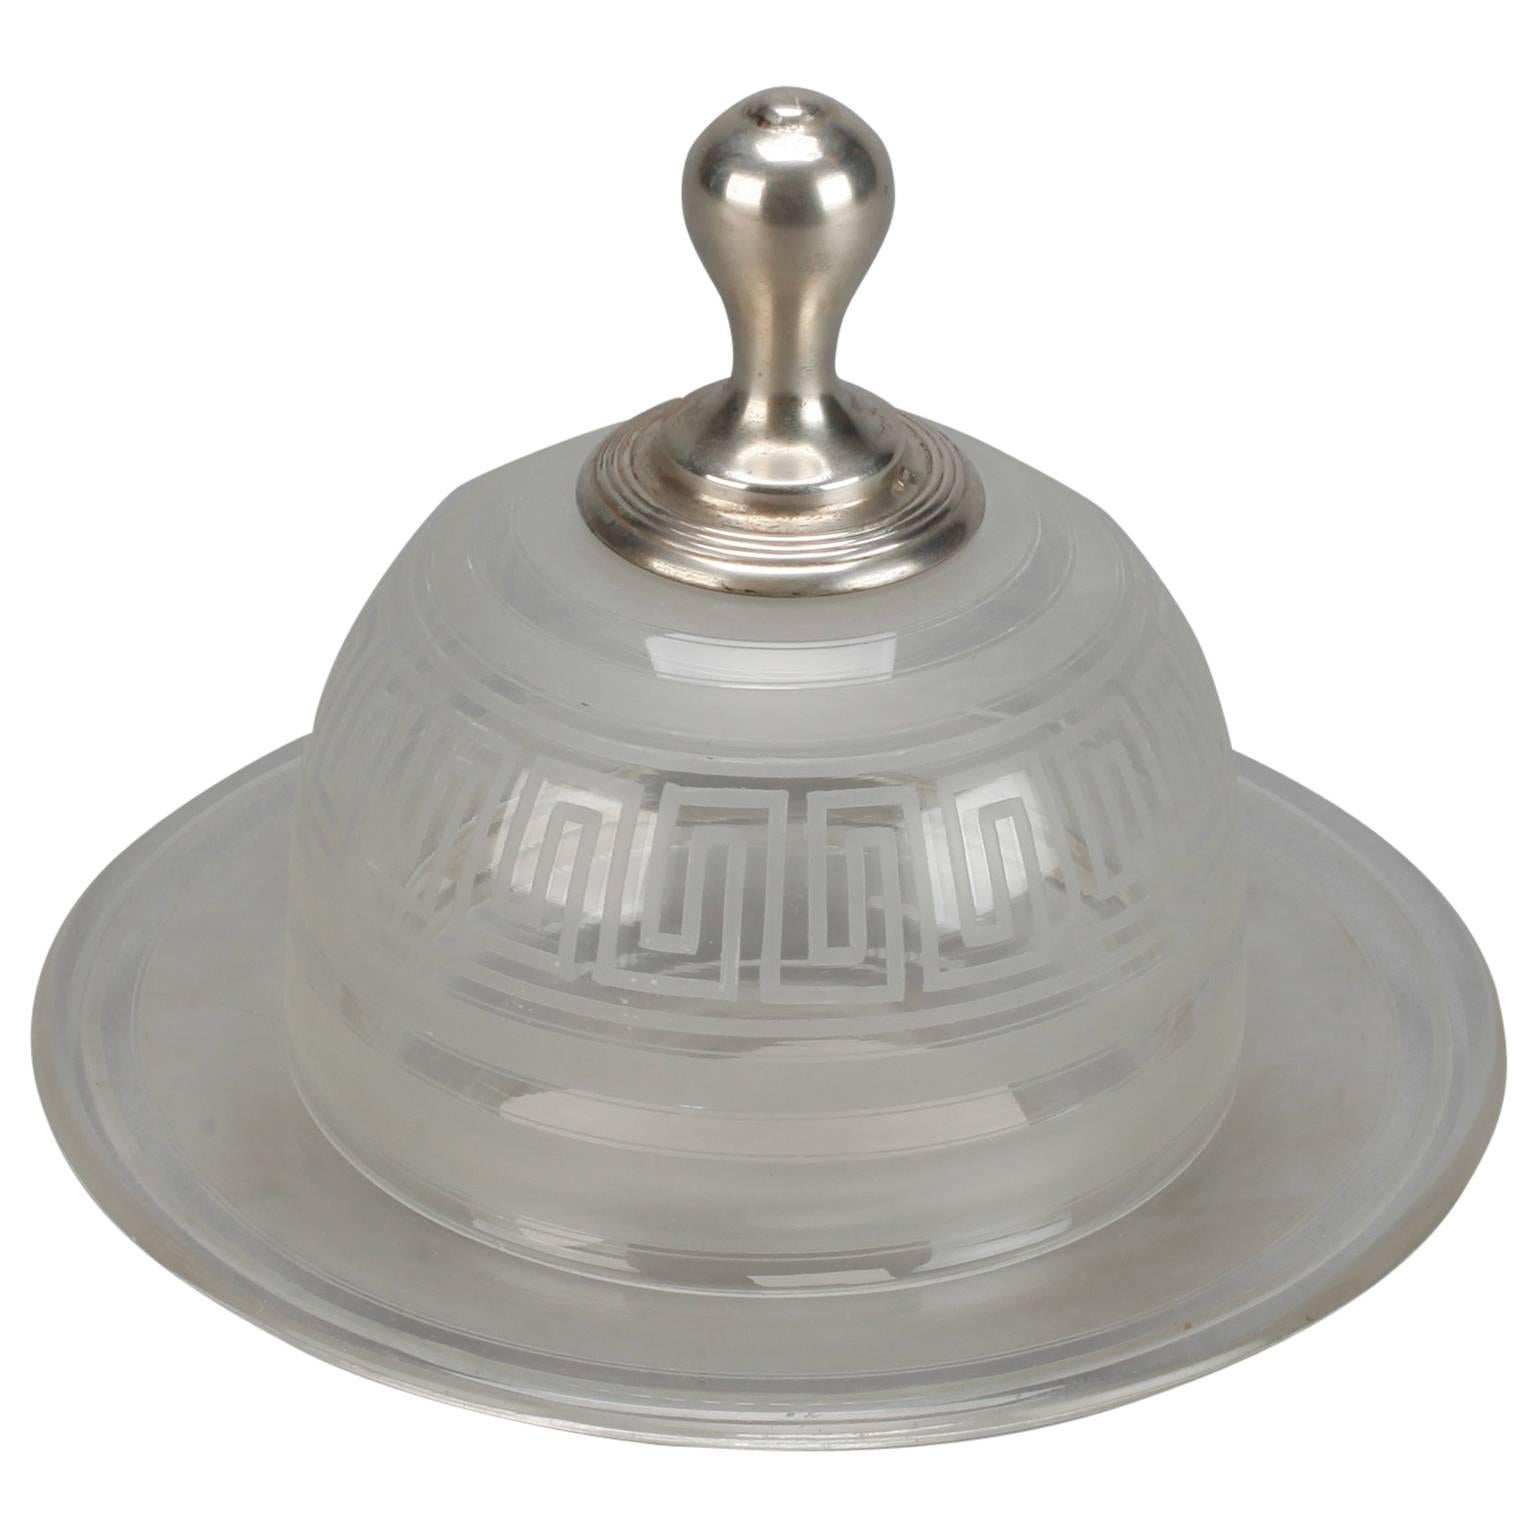 Etched Glass Domed Plate with Greek Key Border and Sterling Knob